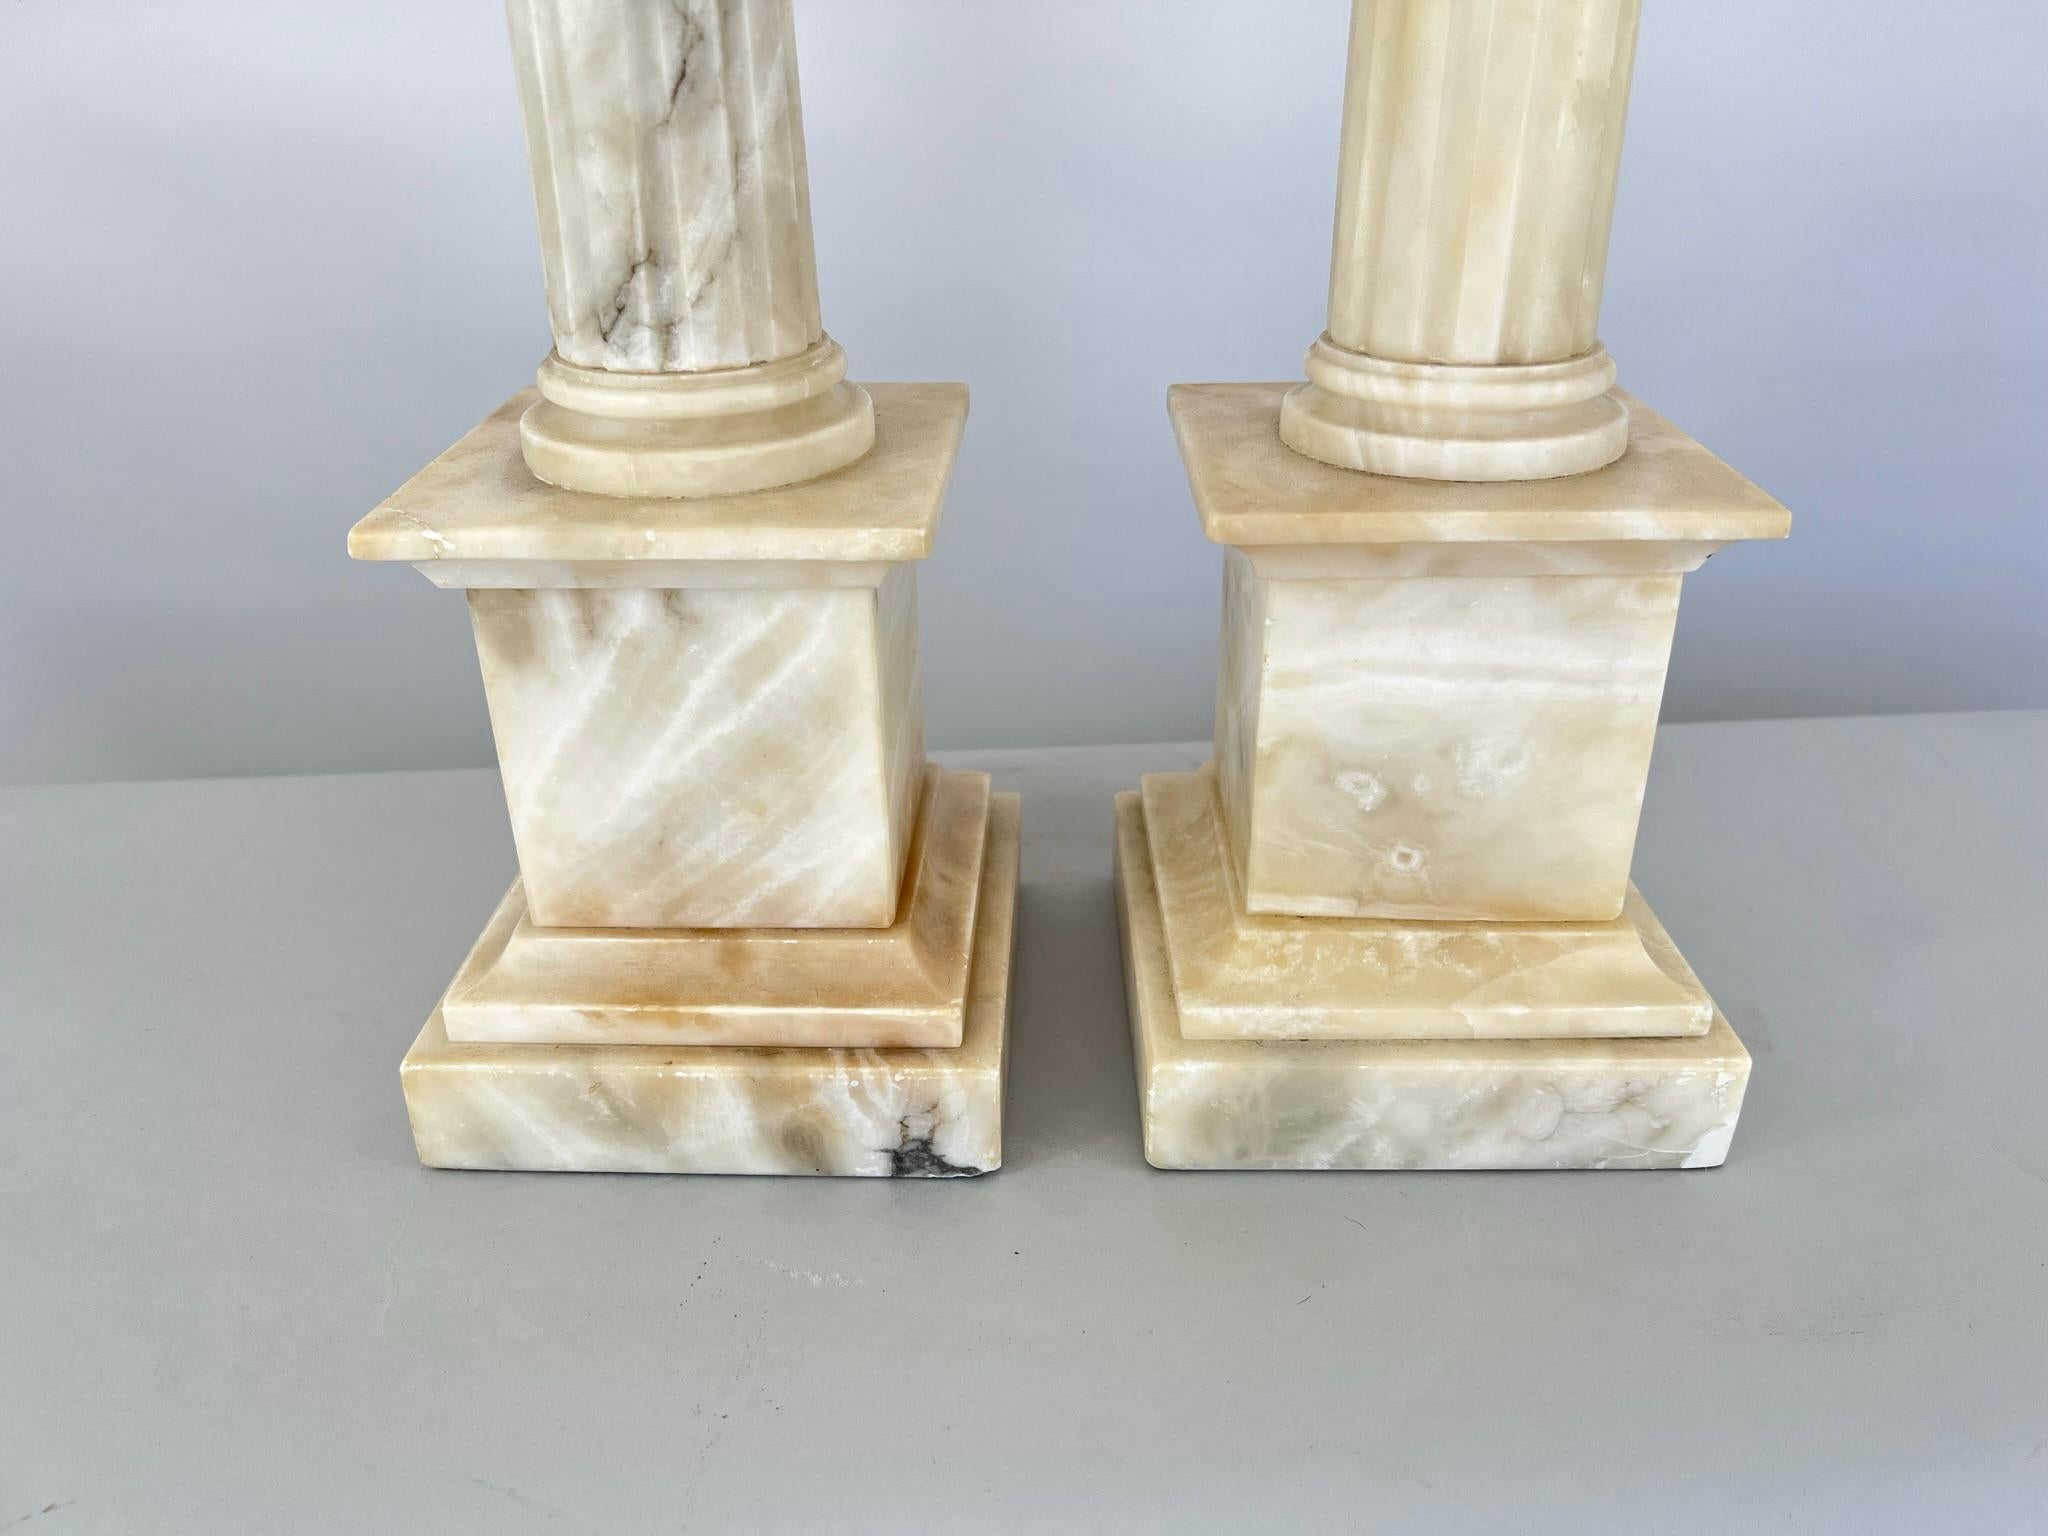 Pair of Carved Alabaster Columnar Lamps with Ionic Capitals In Good Condition For Sale In West Palm Beach, FL